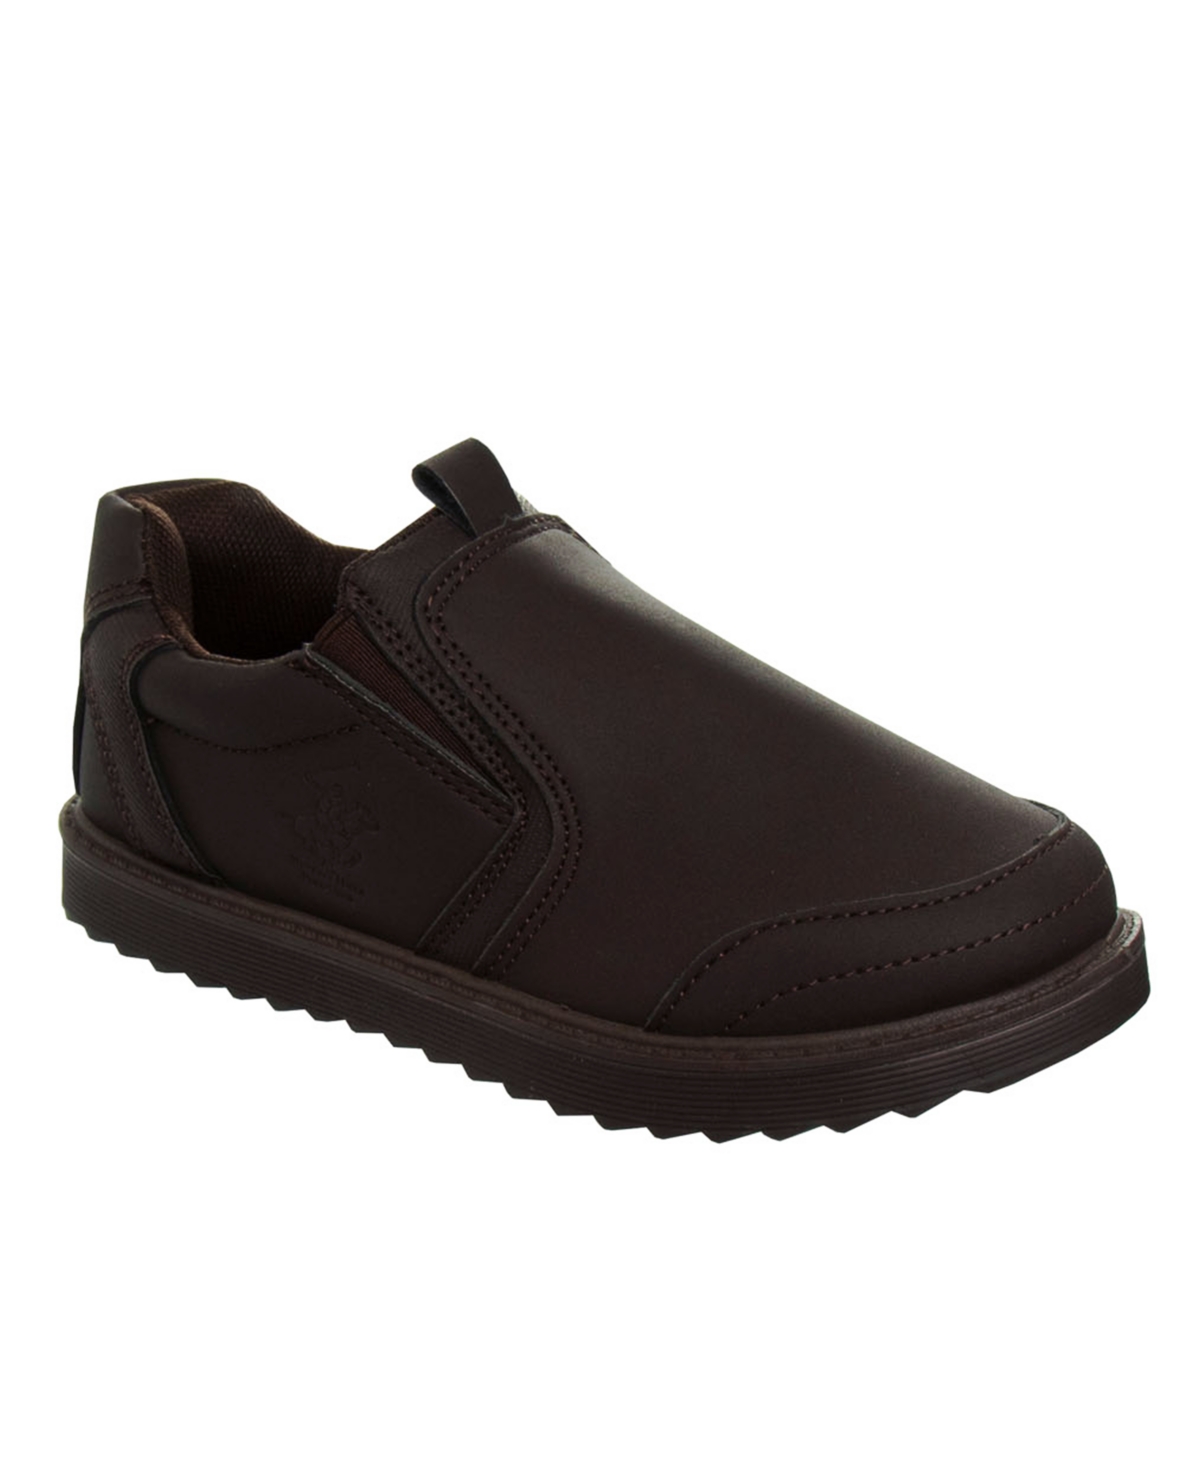 BEVERLY HILLS POLO CLUB LITTLE BOYS CASUAL SLIP ON SHOES